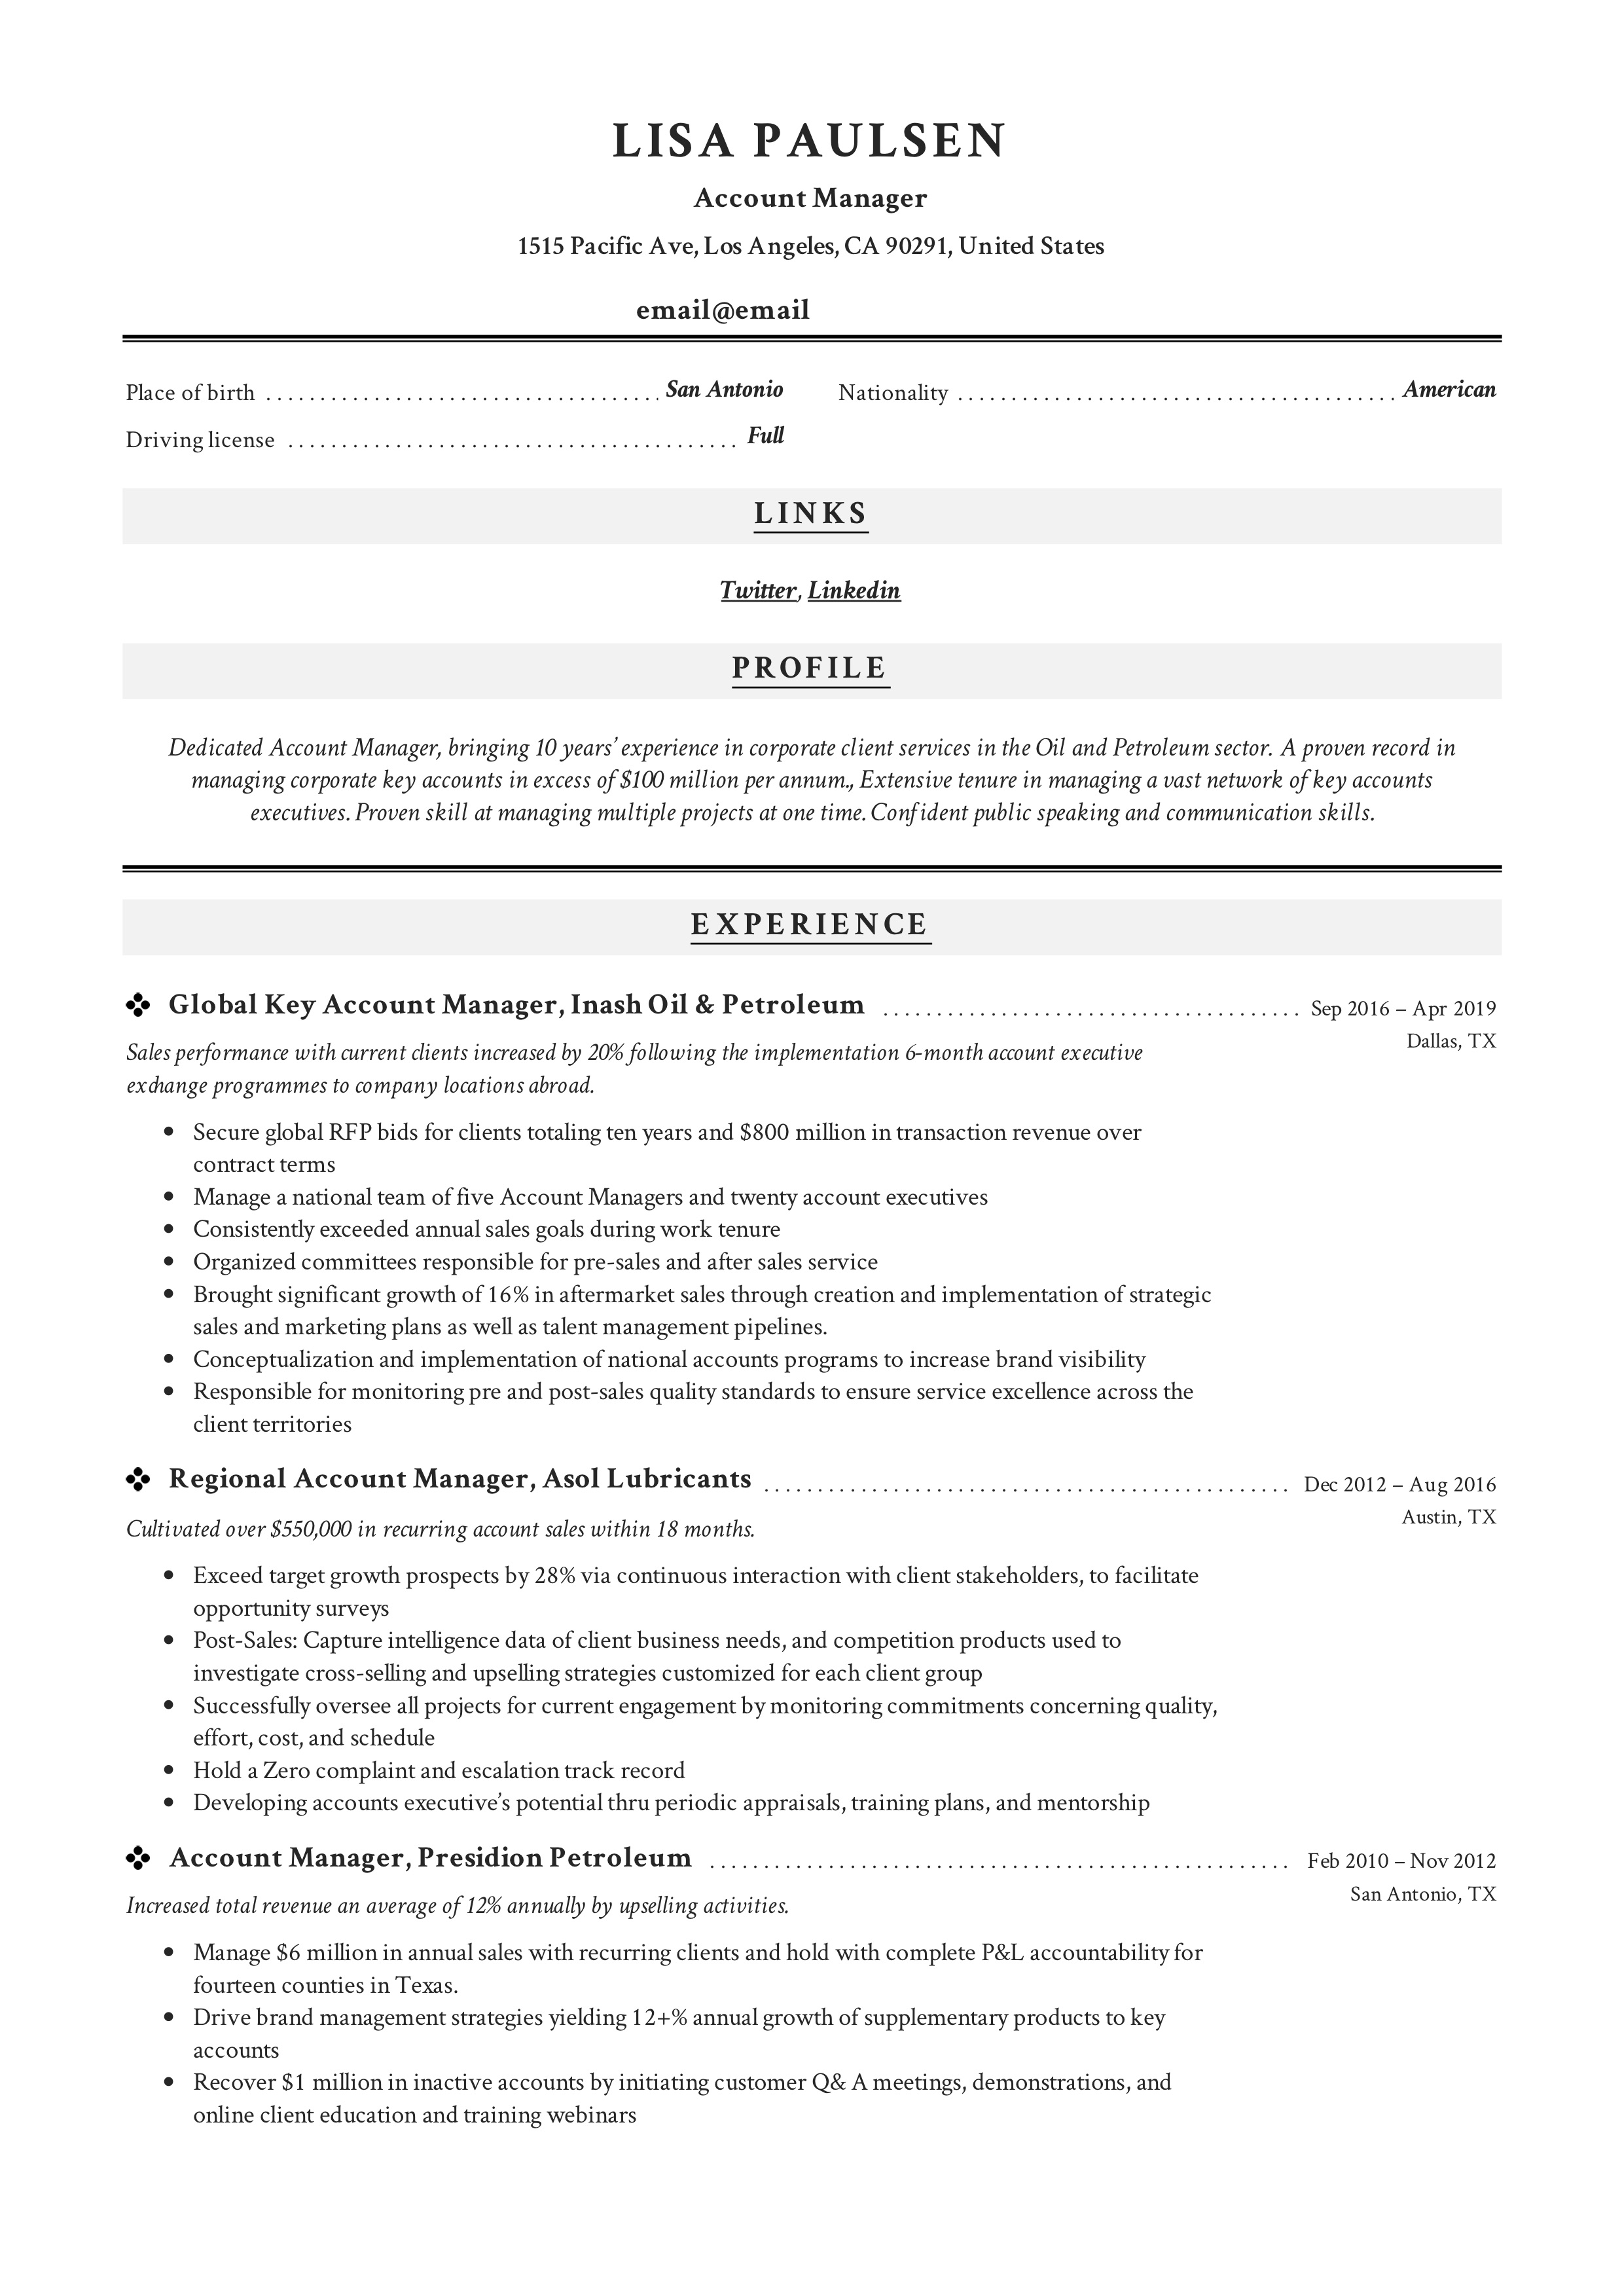 Professional Account manager resume example